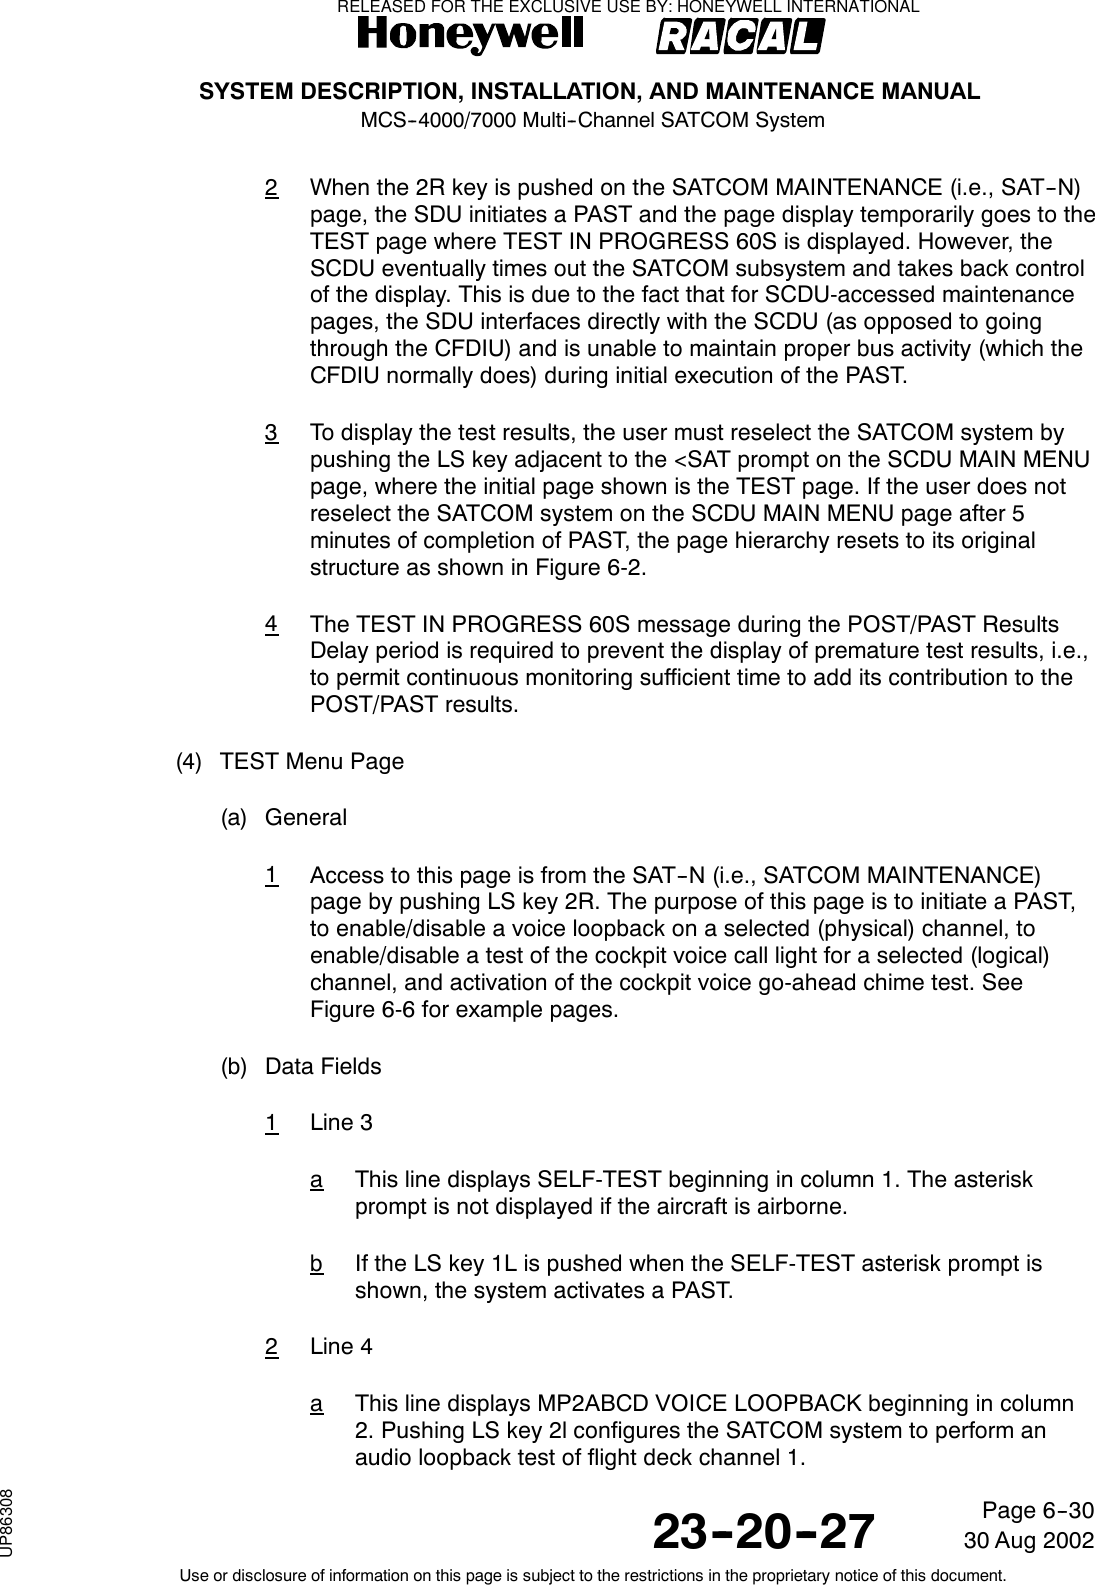 SYSTEM DESCRIPTION, INSTALLATION, AND MAINTENANCE MANUALMCS--4000/7000 Multi--Channel SATCOM System23--20--2730 Aug 2002Use or disclosure of information on this page is subject to the restrictions in the proprietary notice of this document.Page 6--302When the 2R key is pushed on the SATCOM MAINTENANCE (i.e., SAT--N)page, the SDU initiates a PAST and the page display temporarily goes to theTEST page where TEST IN PROGRESS 60S is displayed. However, theSCDU eventually times out the SATCOM subsystem and takes back controlof the display. This is due to the fact that for SCDU-accessed maintenancepages, the SDU interfaces directly with the SCDU (as opposed to goingthrough the CFDIU) and is unable to maintain proper bus activity (which theCFDIU normally does) during initial execution of the PAST.3To display the test results, the user must reselect the SATCOM system bypushing the LS key adjacent to the &lt;SAT prompt on the SCDU MAIN MENUpage, where the initial page shown is the TEST page. If the user does notreselect the SATCOM system on the SCDU MAIN MENU page after 5minutes of completion of PAST, the page hierarchy resets to its originalstructure as shown in Figure 6-2.4The TEST IN PROGRESS 60S message during the POST/PAST ResultsDelay period is required to prevent the display of premature test results, i.e.,to permit continuous monitoring sufficient time to add its contribution to thePOST/PAST results.(4) TEST Menu Page(a) General1Access to this page is from the SAT--N (i.e., SATCOM MAINTENANCE)page by pushing LS key 2R. The purpose of this page is to initiate a PAST,to enable/disable a voice loopback on a selected (physical) channel, toenable/disable a test of the cockpit voice call light for a selected (logical)channel, and activation of the cockpit voice go-ahead chime test. SeeFigure 6-6 for example pages.(b) Data Fields1Line 3aThis line displays SELF-TEST beginning in column 1. The asteriskprompt is not displayed if the aircraft is airborne.bIf the LS key 1L is pushed when the SELF-TEST asterisk prompt isshown, the system activates a PAST.2Line 4aThis line displays MP2ABCD VOICE LOOPBACK beginning in column2. Pushing LS key 2l configures the SATCOM system to perform anaudio loopback test of flight deck channel 1.RELEASED FOR THE EXCLUSIVE USE BY: HONEYWELL INTERNATIONALUP86308